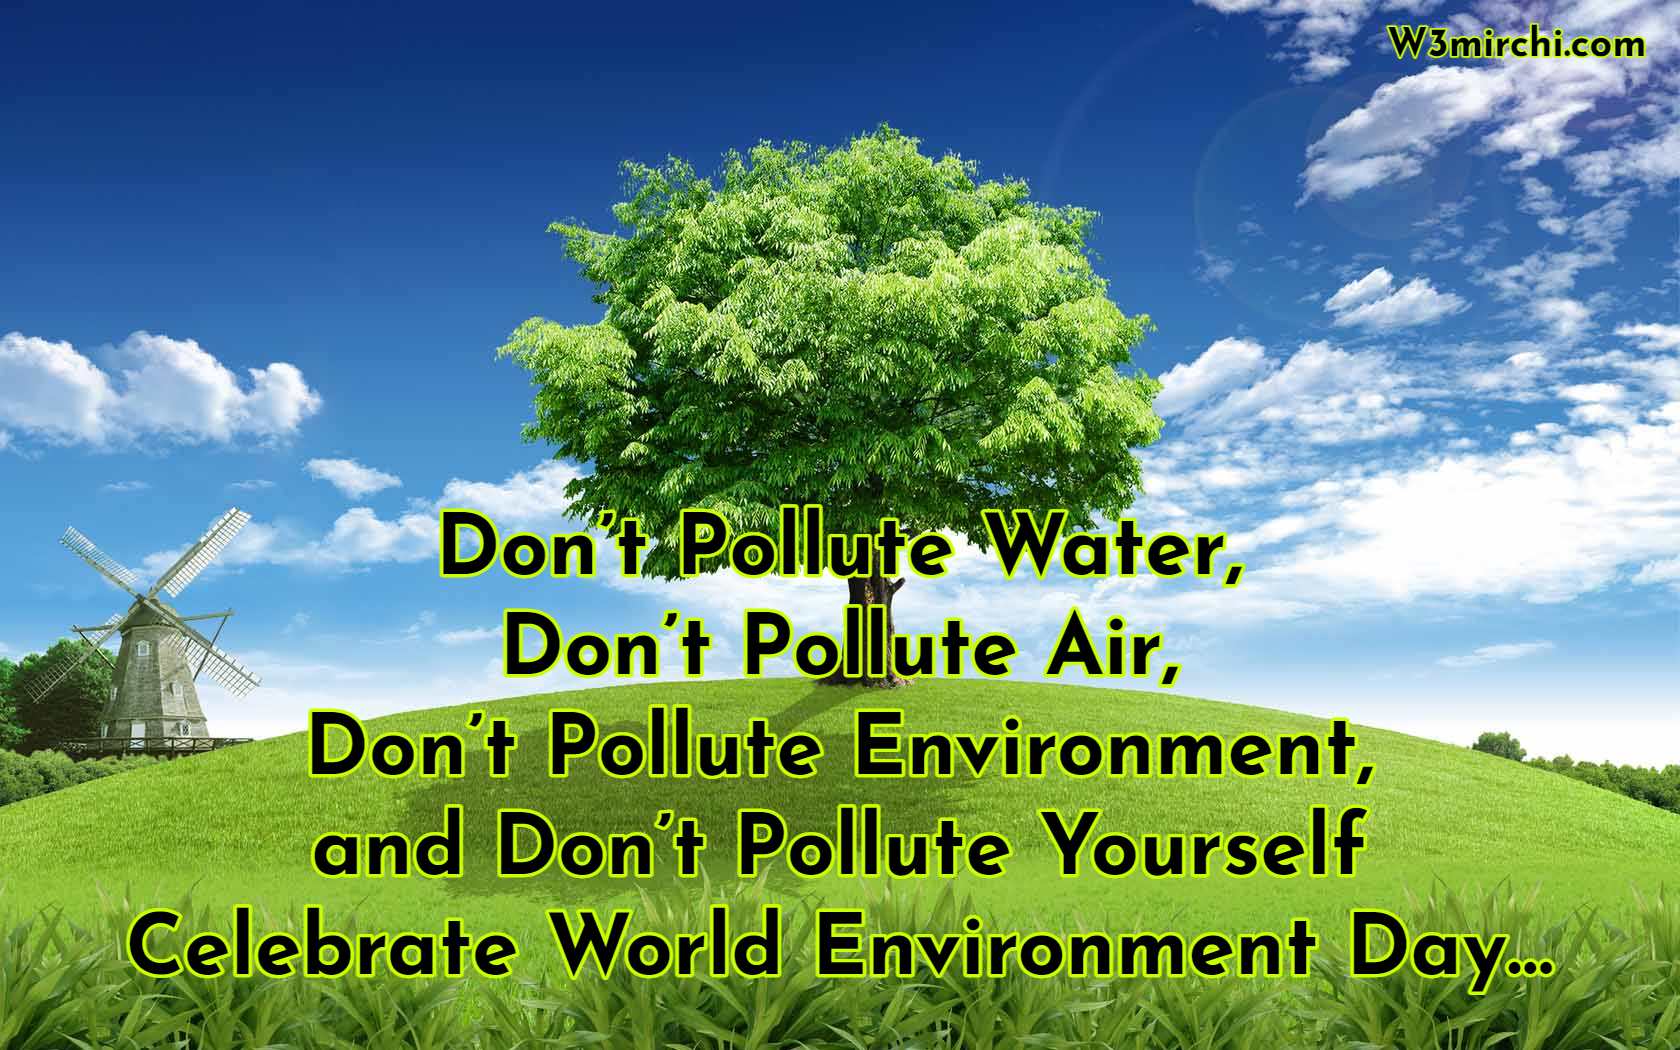 Don’t Pollute Water, Don’t Pollute Air,